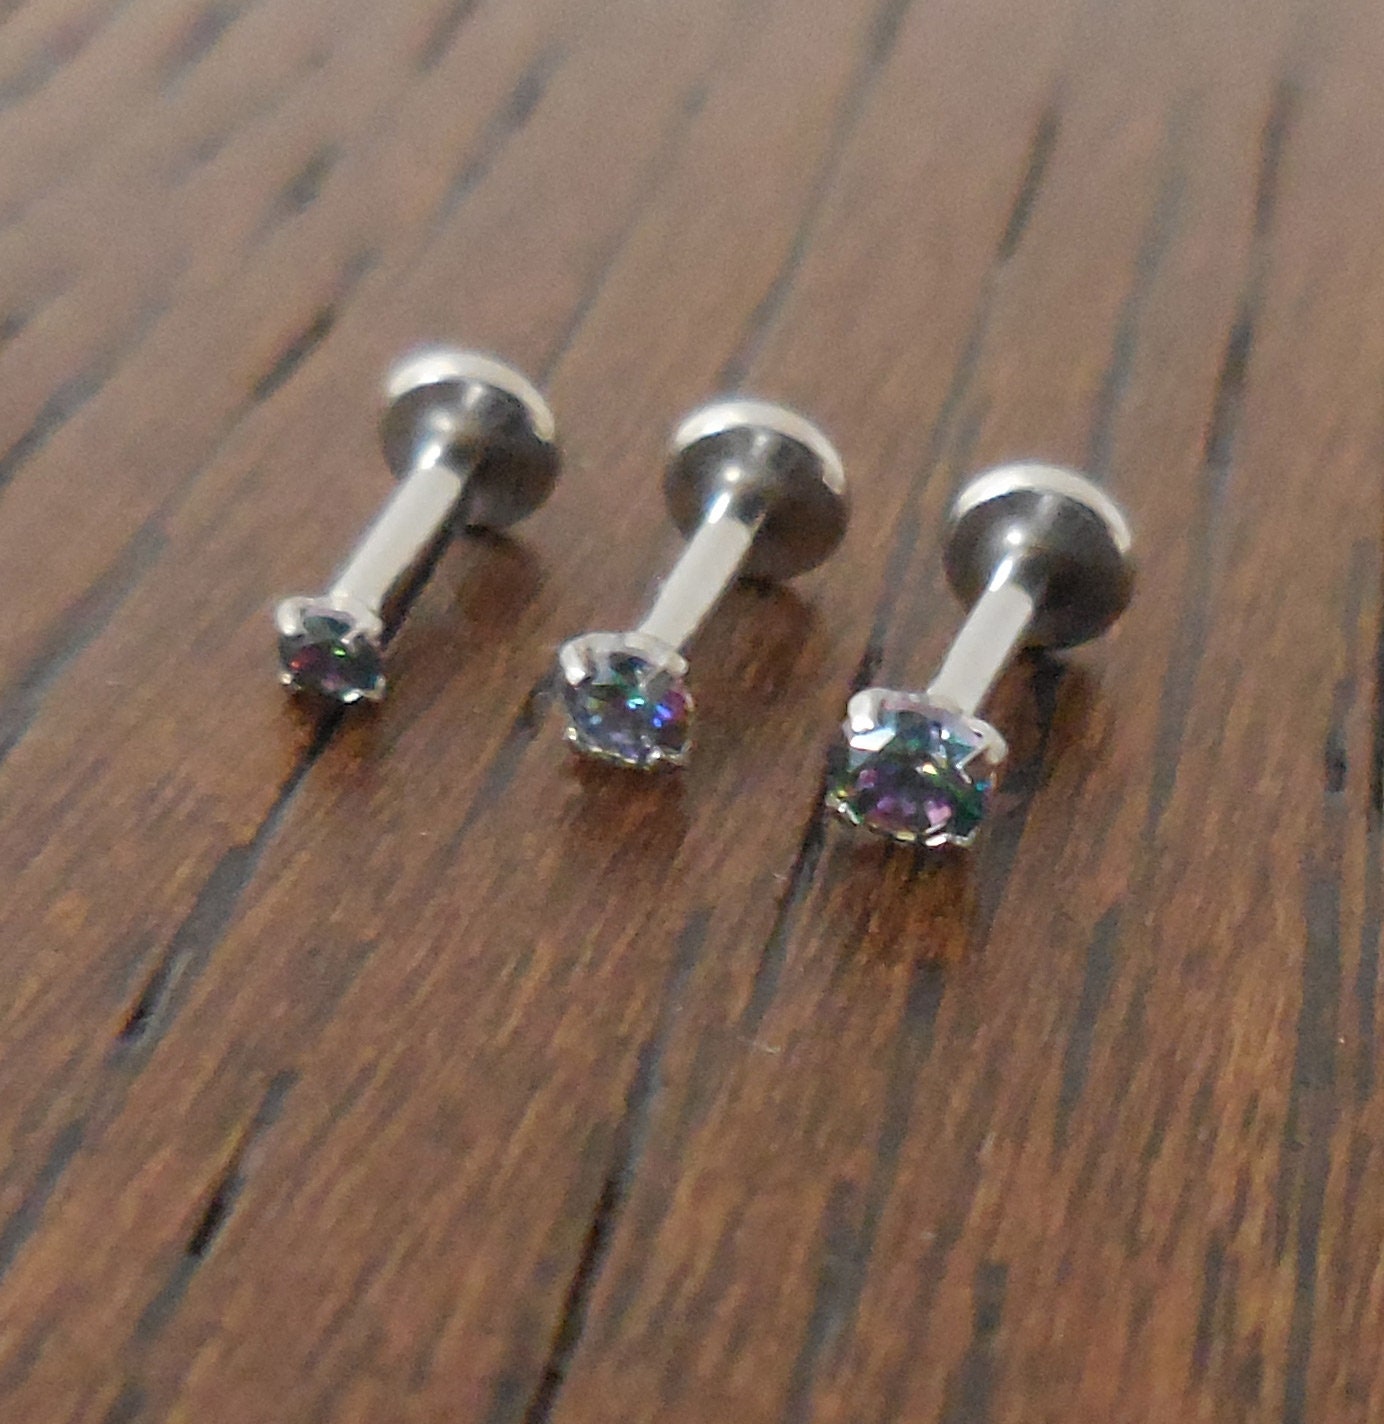 16g 2-4mm Tragus 6mm-8mm Threadless Push Pin Labret Triple Forward Helix Rainbow CZ Stone Ring Cartilage Earrings Stainless Prong Set